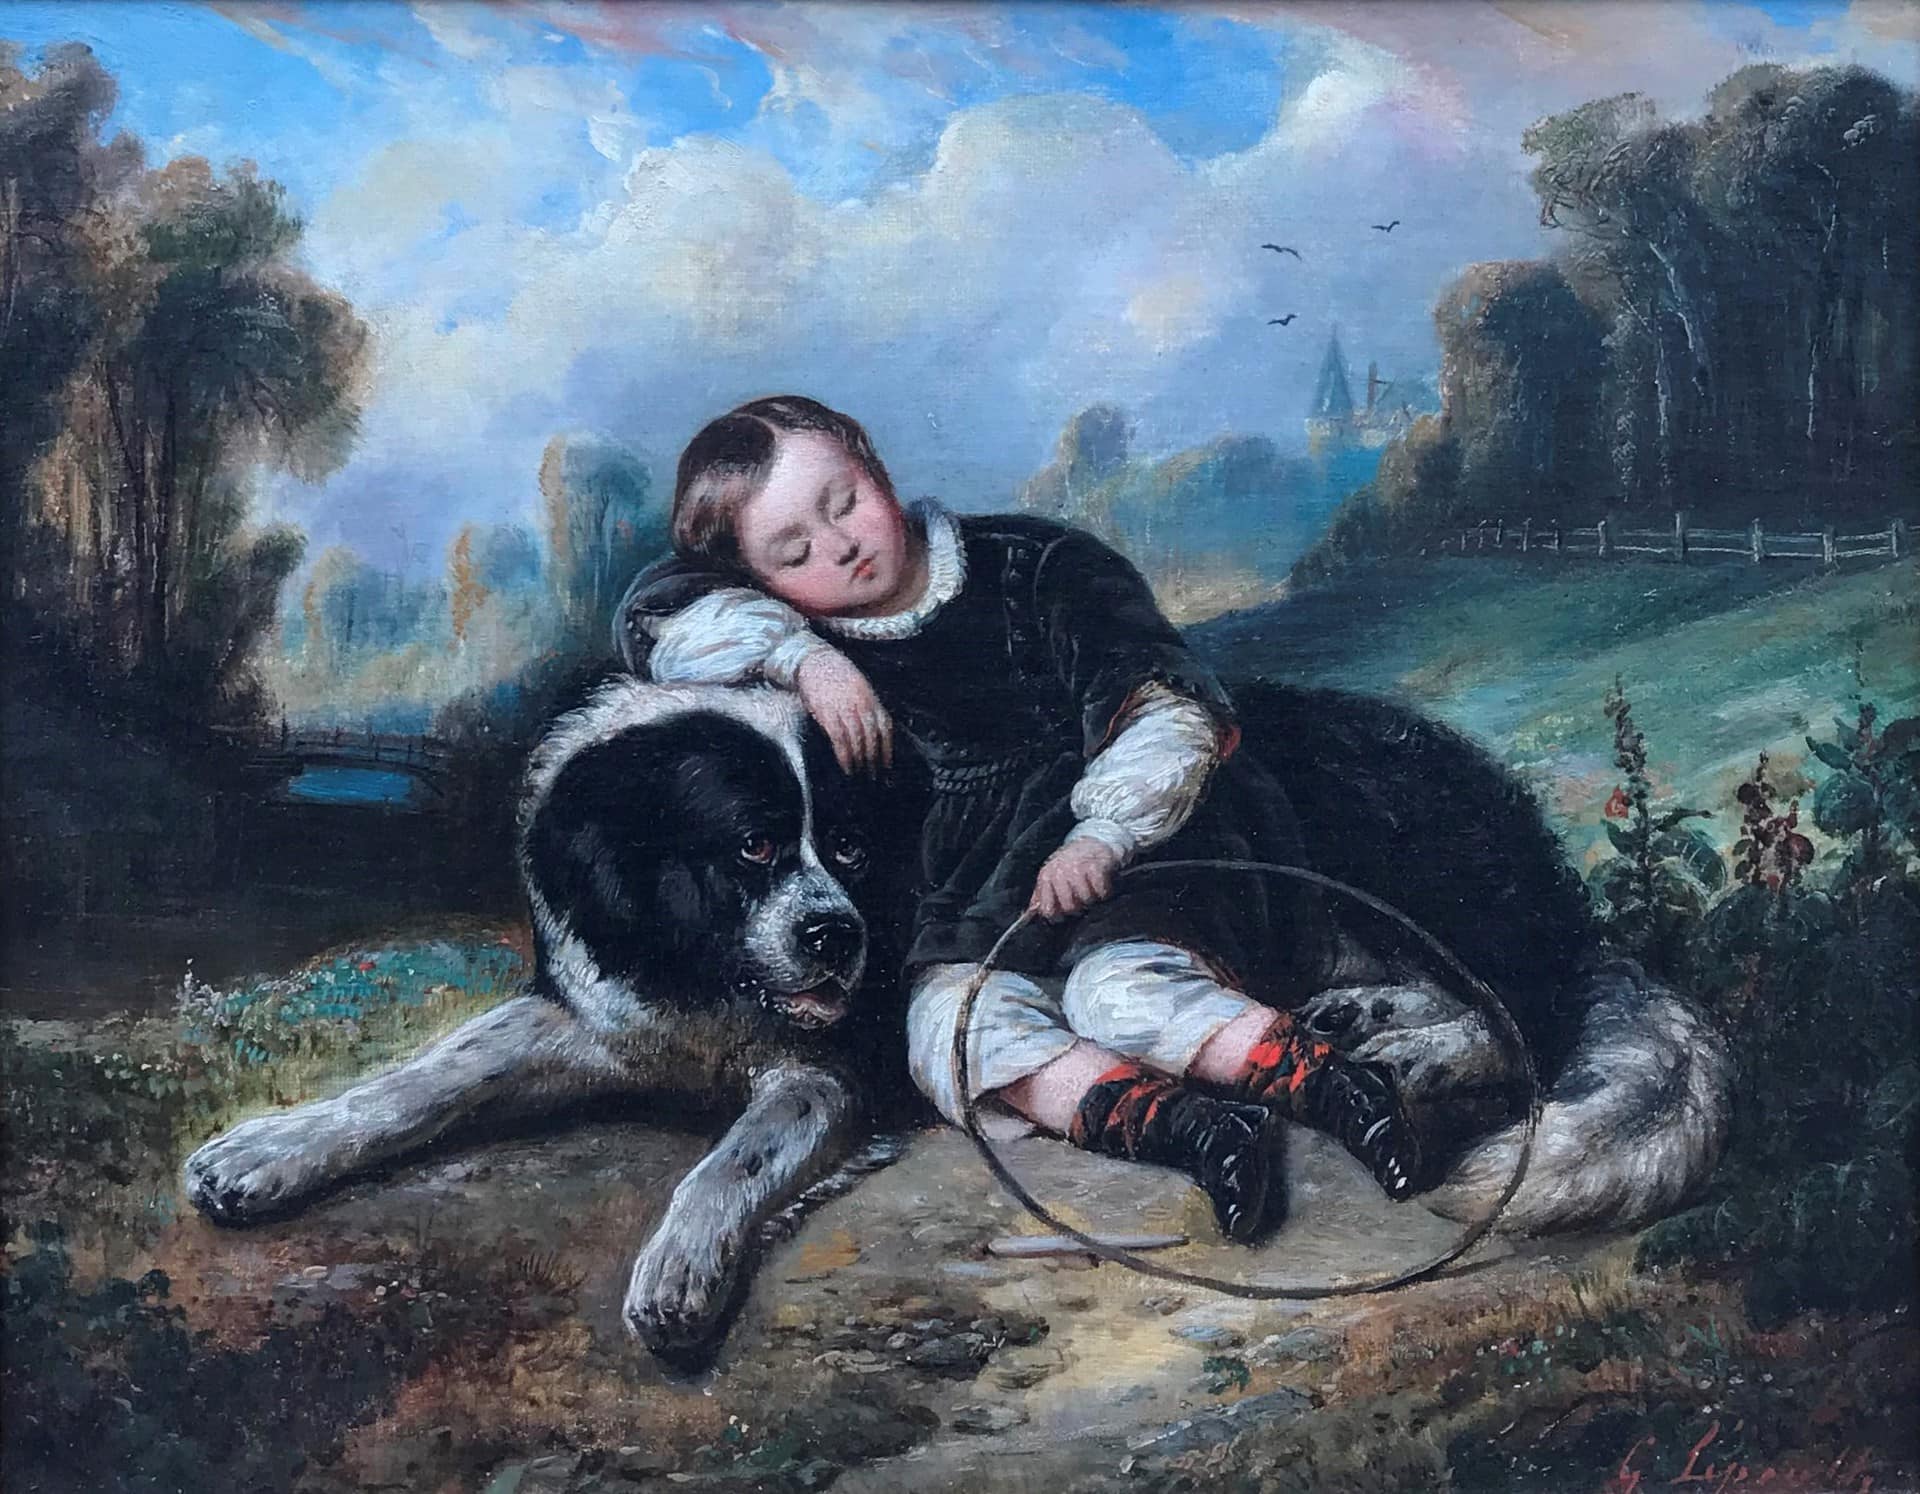 LePaulle's Boy with his Dog. Boy sleeping against alert and loving large, black and white dog. Both in grassy field.